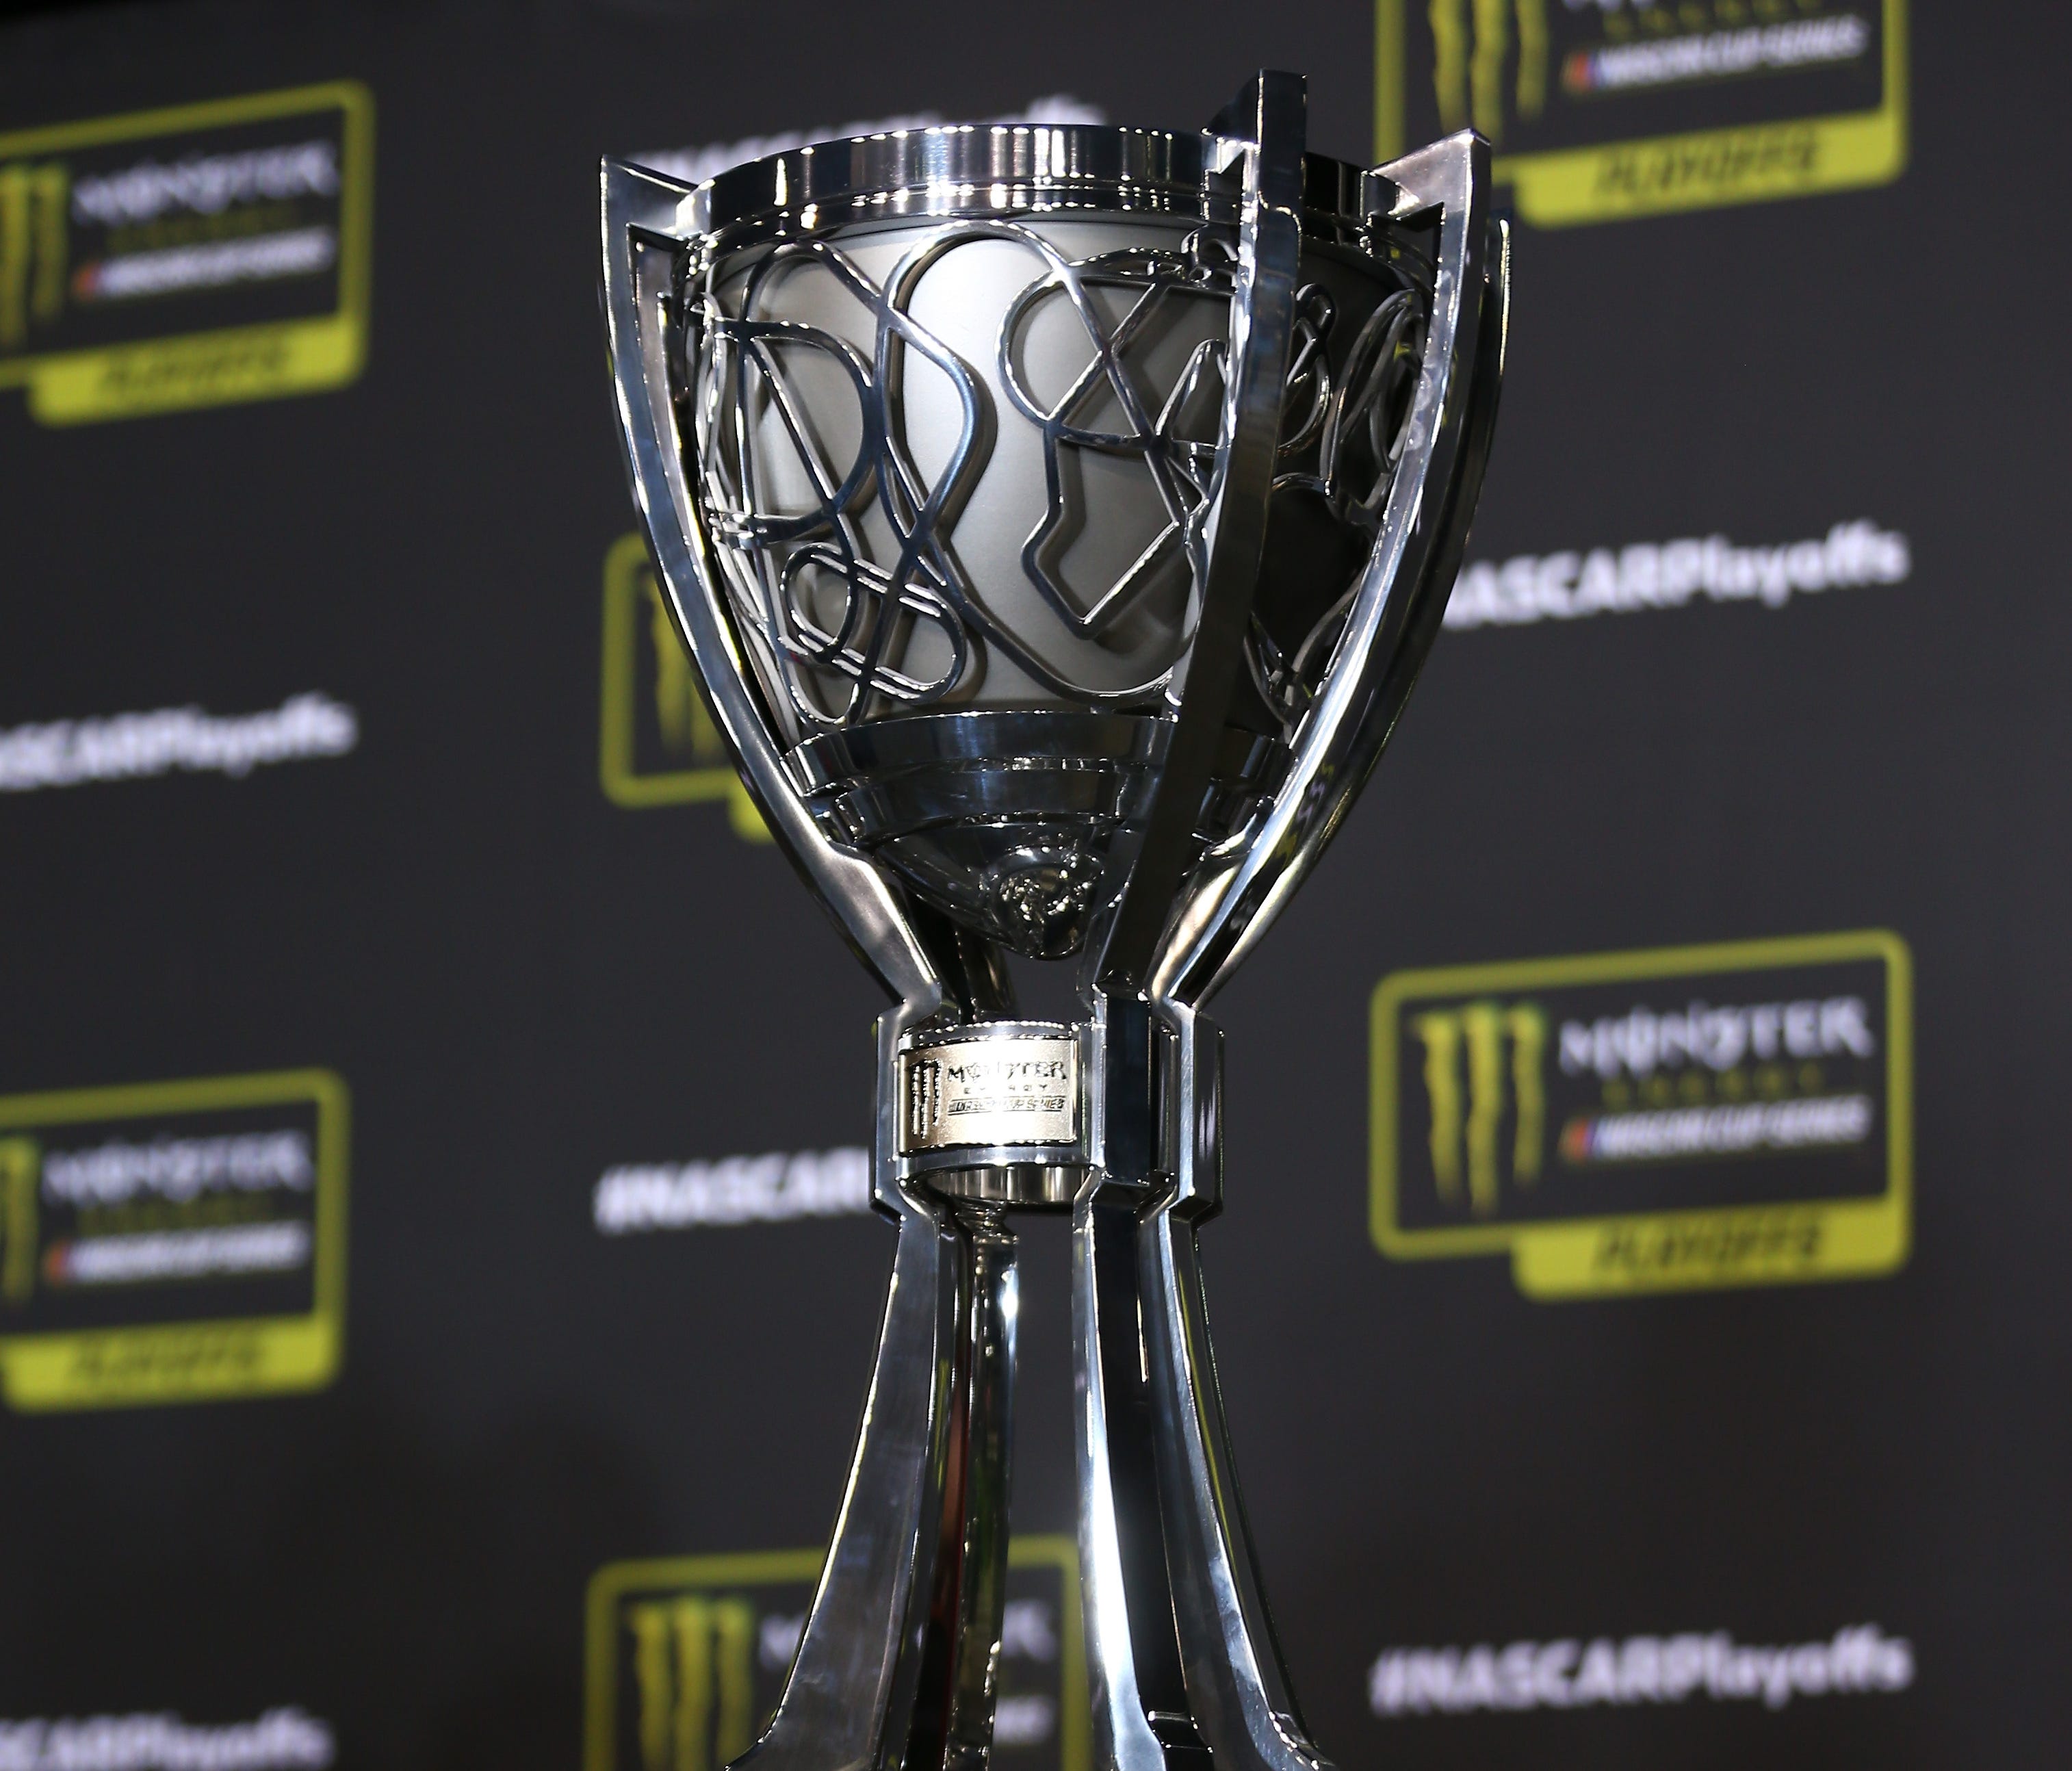 Who will win the inaugural Monster Energy NASCAR Cup Series trophy?